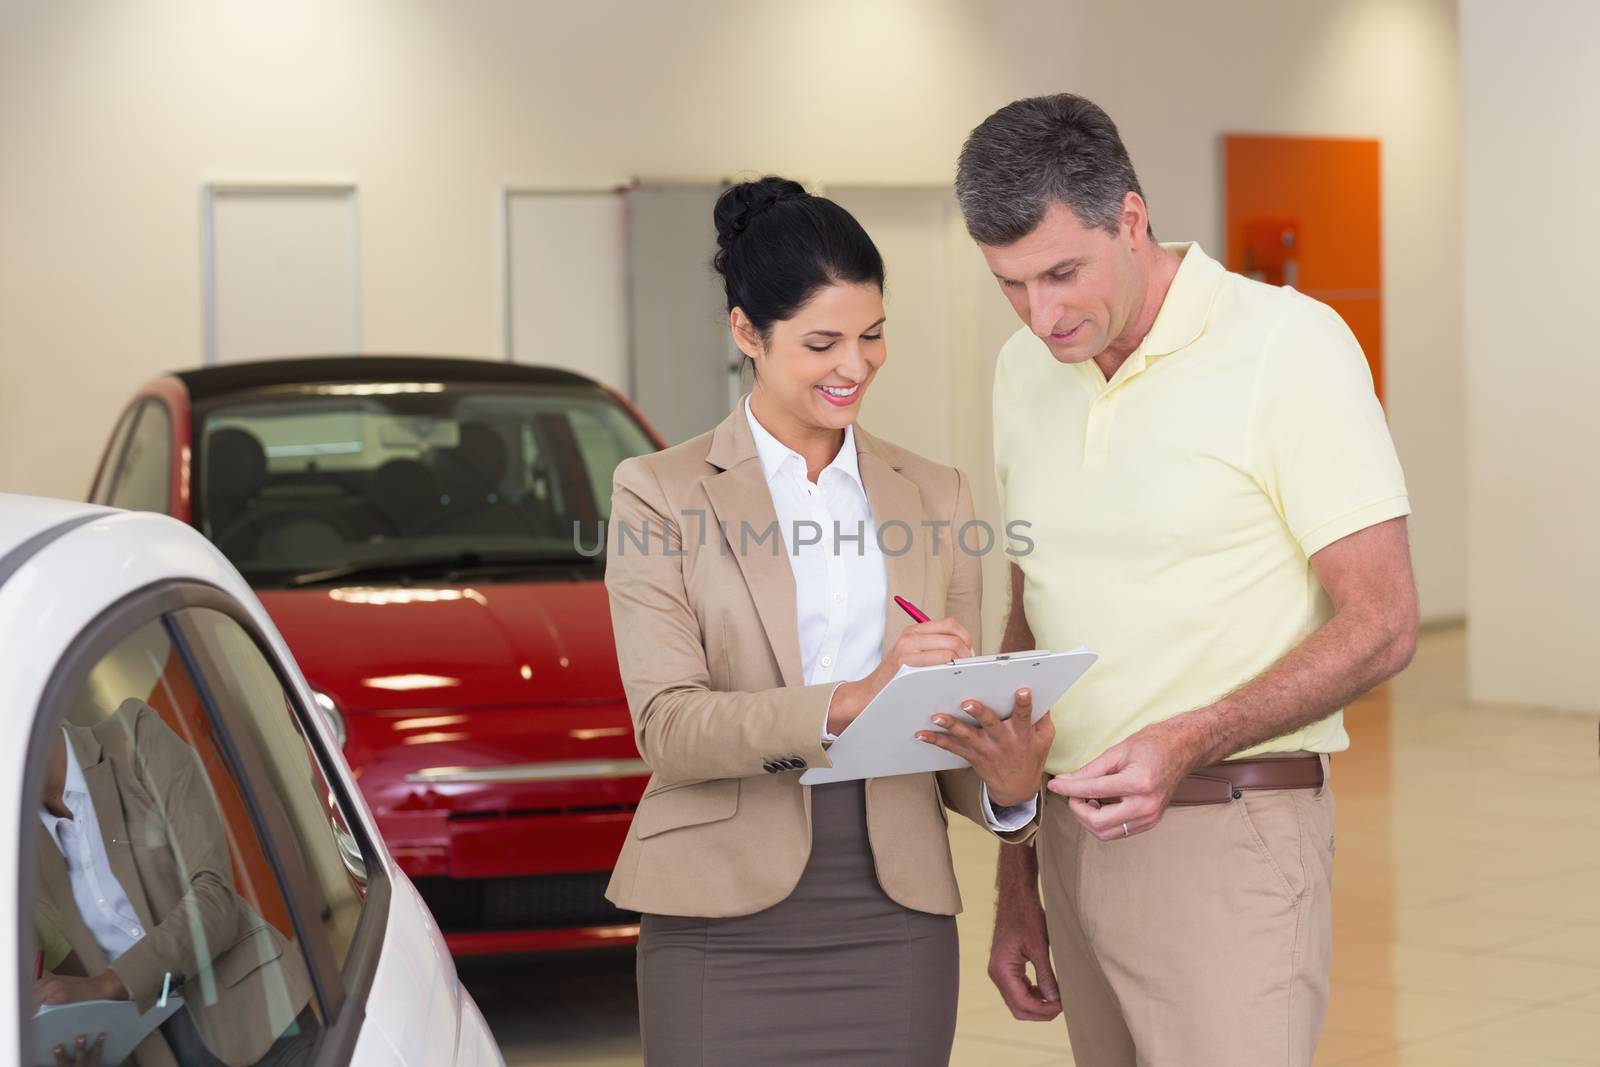 Salesperson showing clipboard to sign to customer by Wavebreakmedia